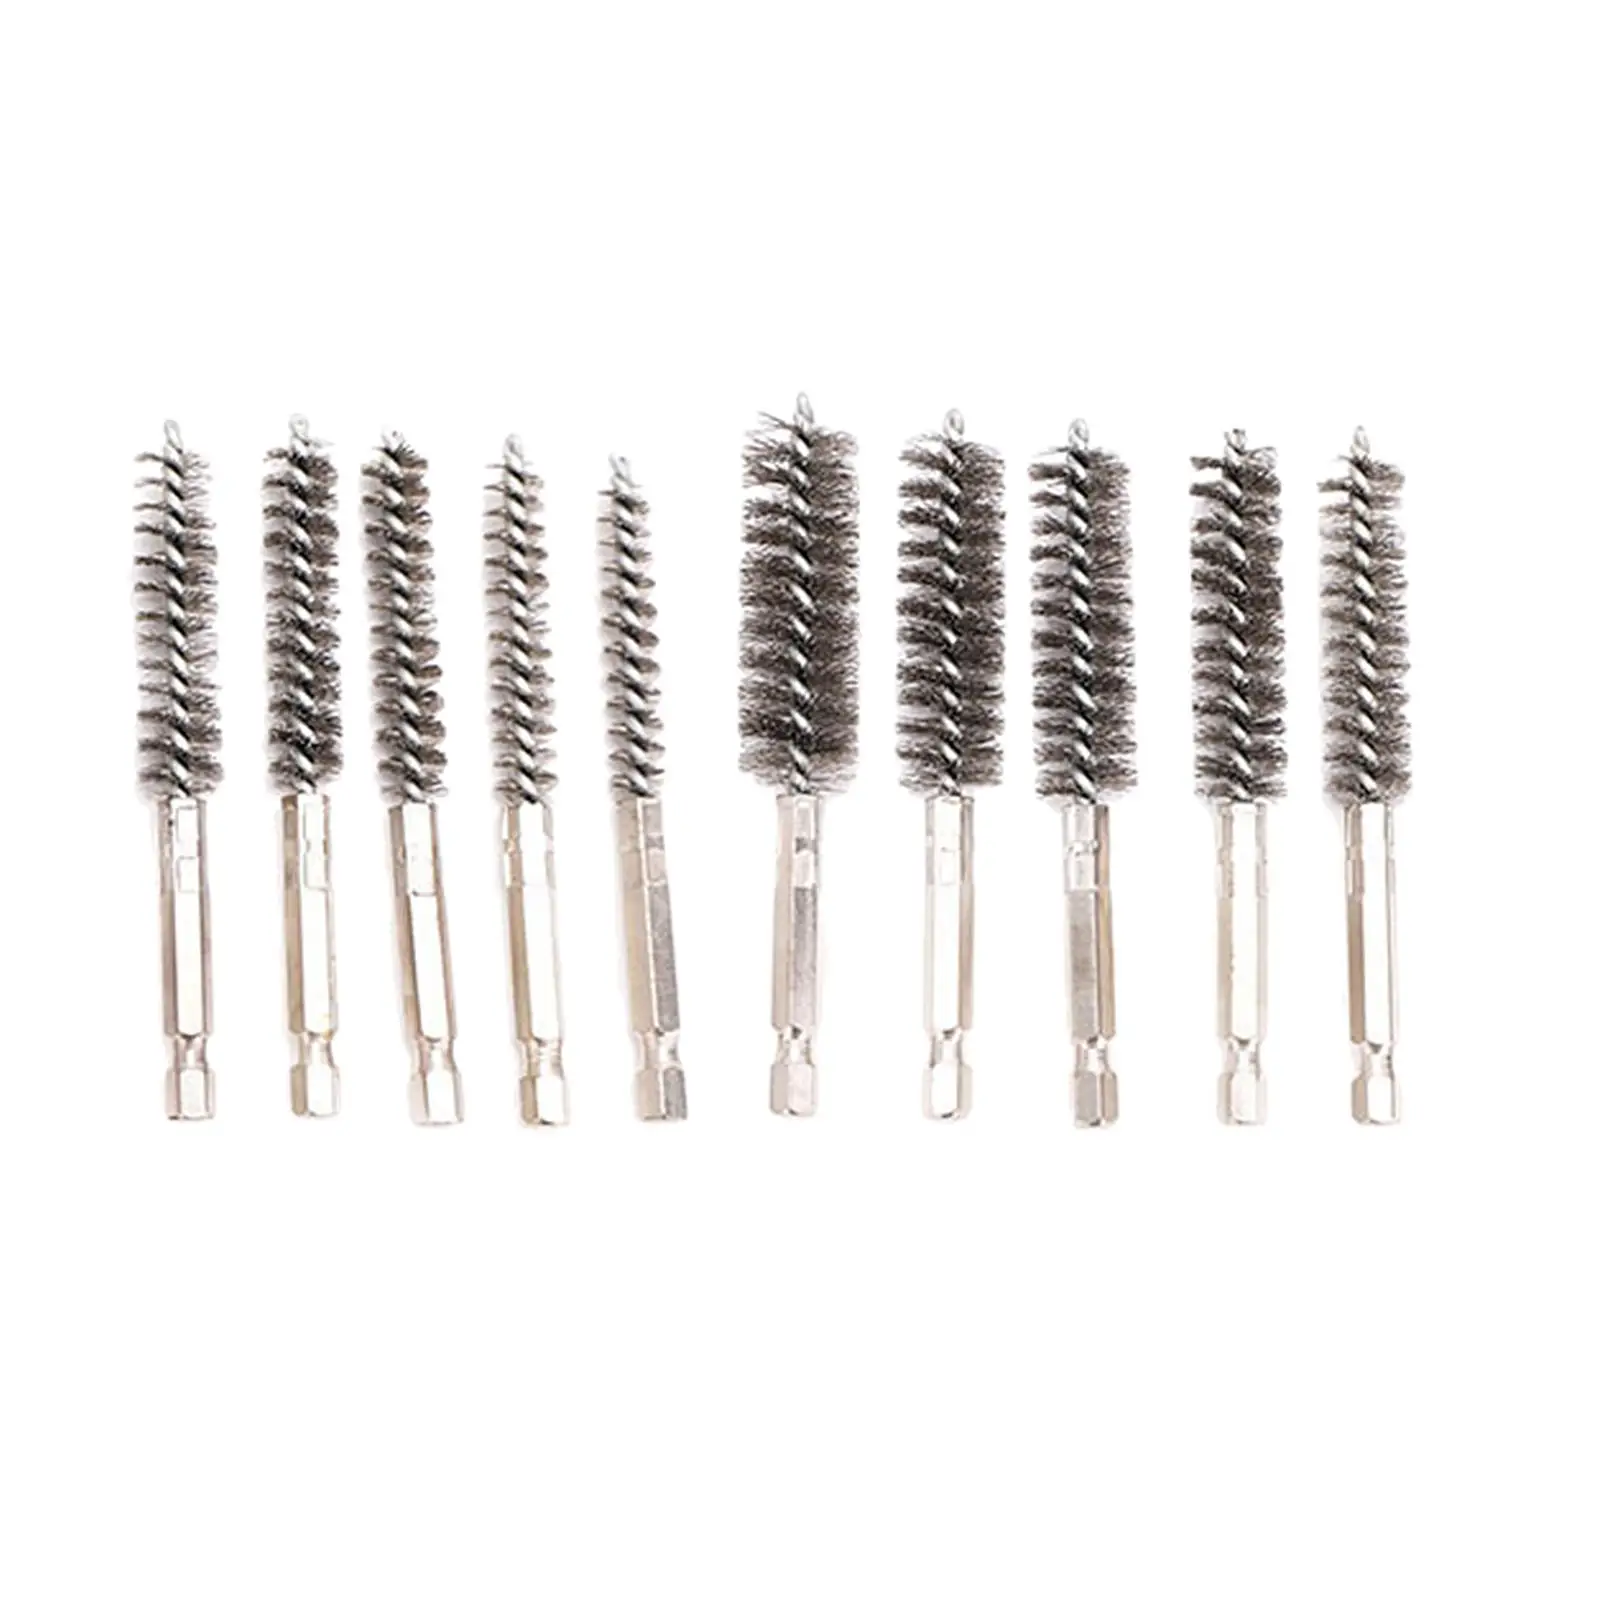 10Pcs Wire Brush Hex Drill Bit Stainless Steel Cleaning Brush for Machining Power Drill Cylinders Cleaning Electric Drill Impact